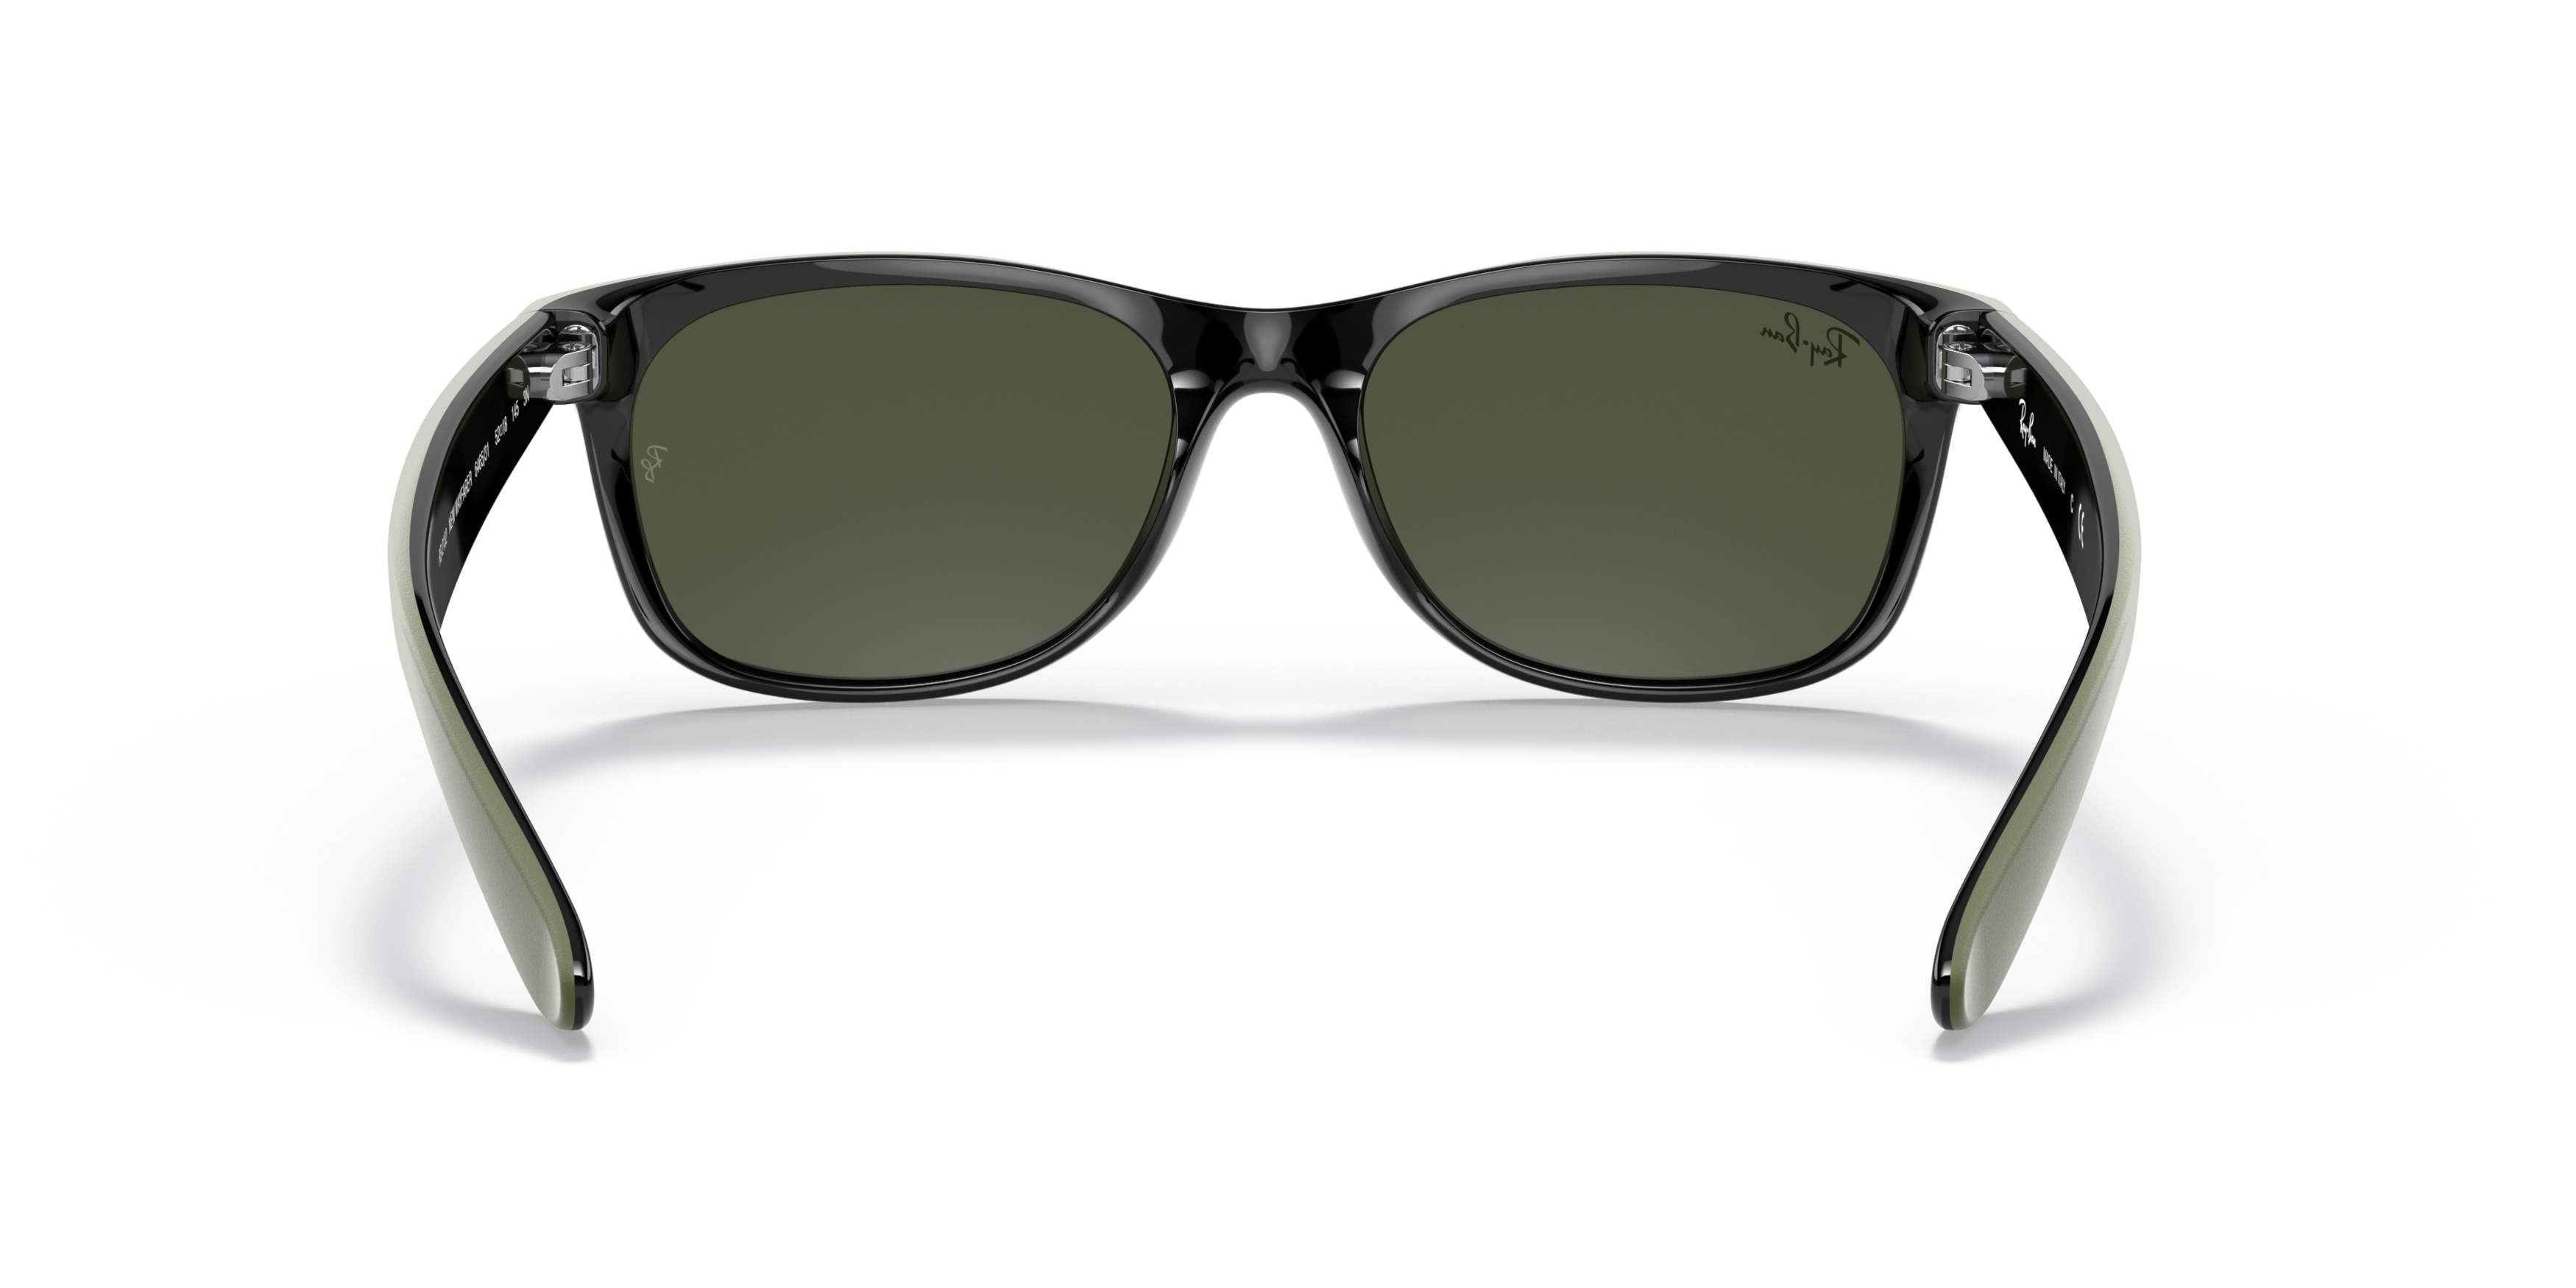 [products.image.detail02] Ray-Ban New Wayfarer Color Mix RB2132 646531